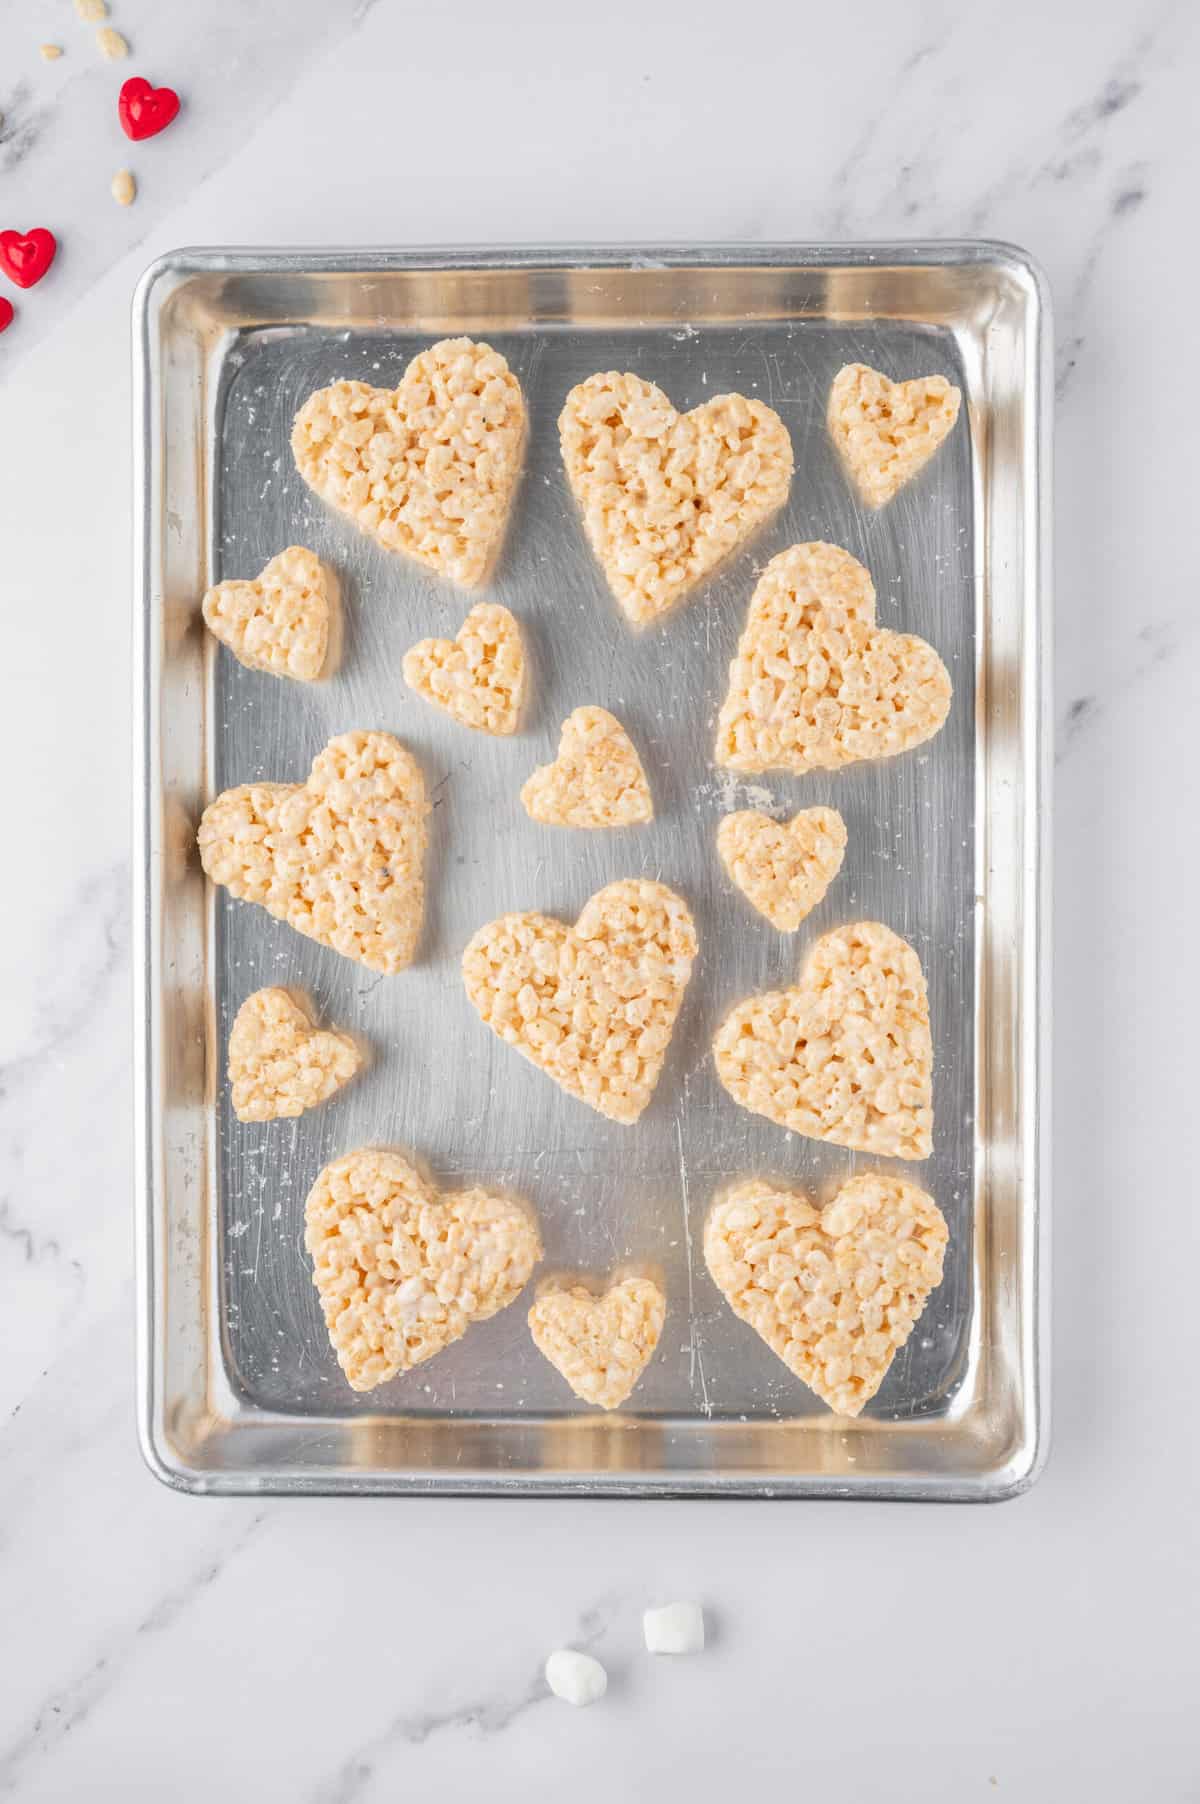 Put all of the Cut out hearts onto a baking sheet.